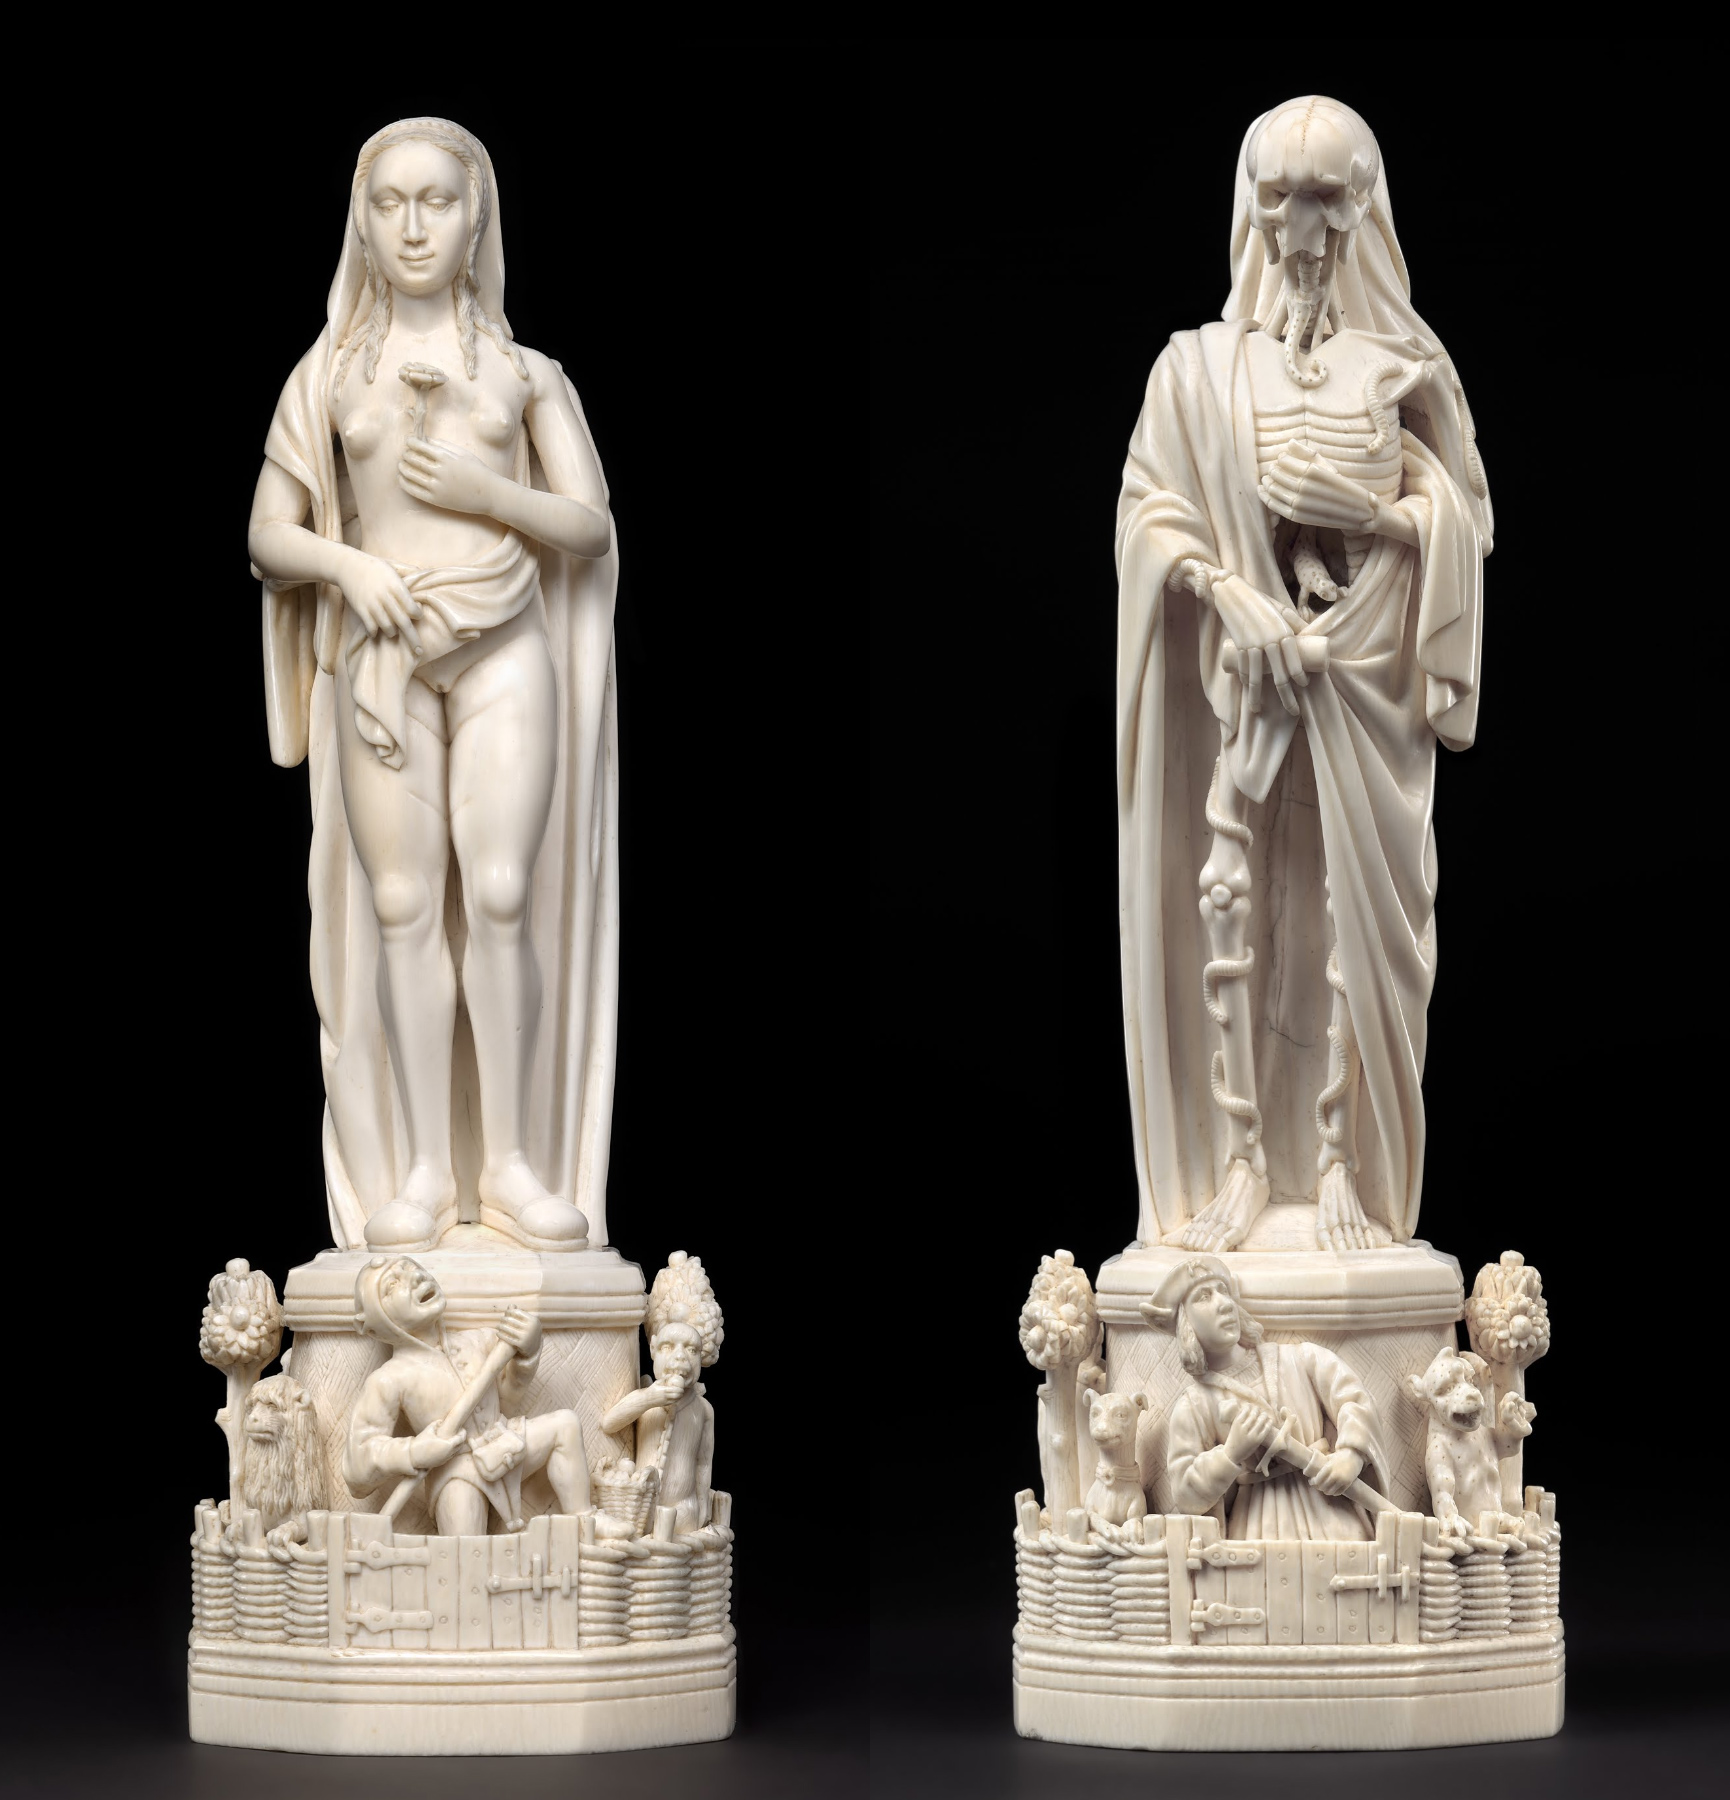 Ivory figure shaped like a young woman on one side, and Death on the other. Attributed to Chicart Bailly. Paris, France, around 1520.jpg